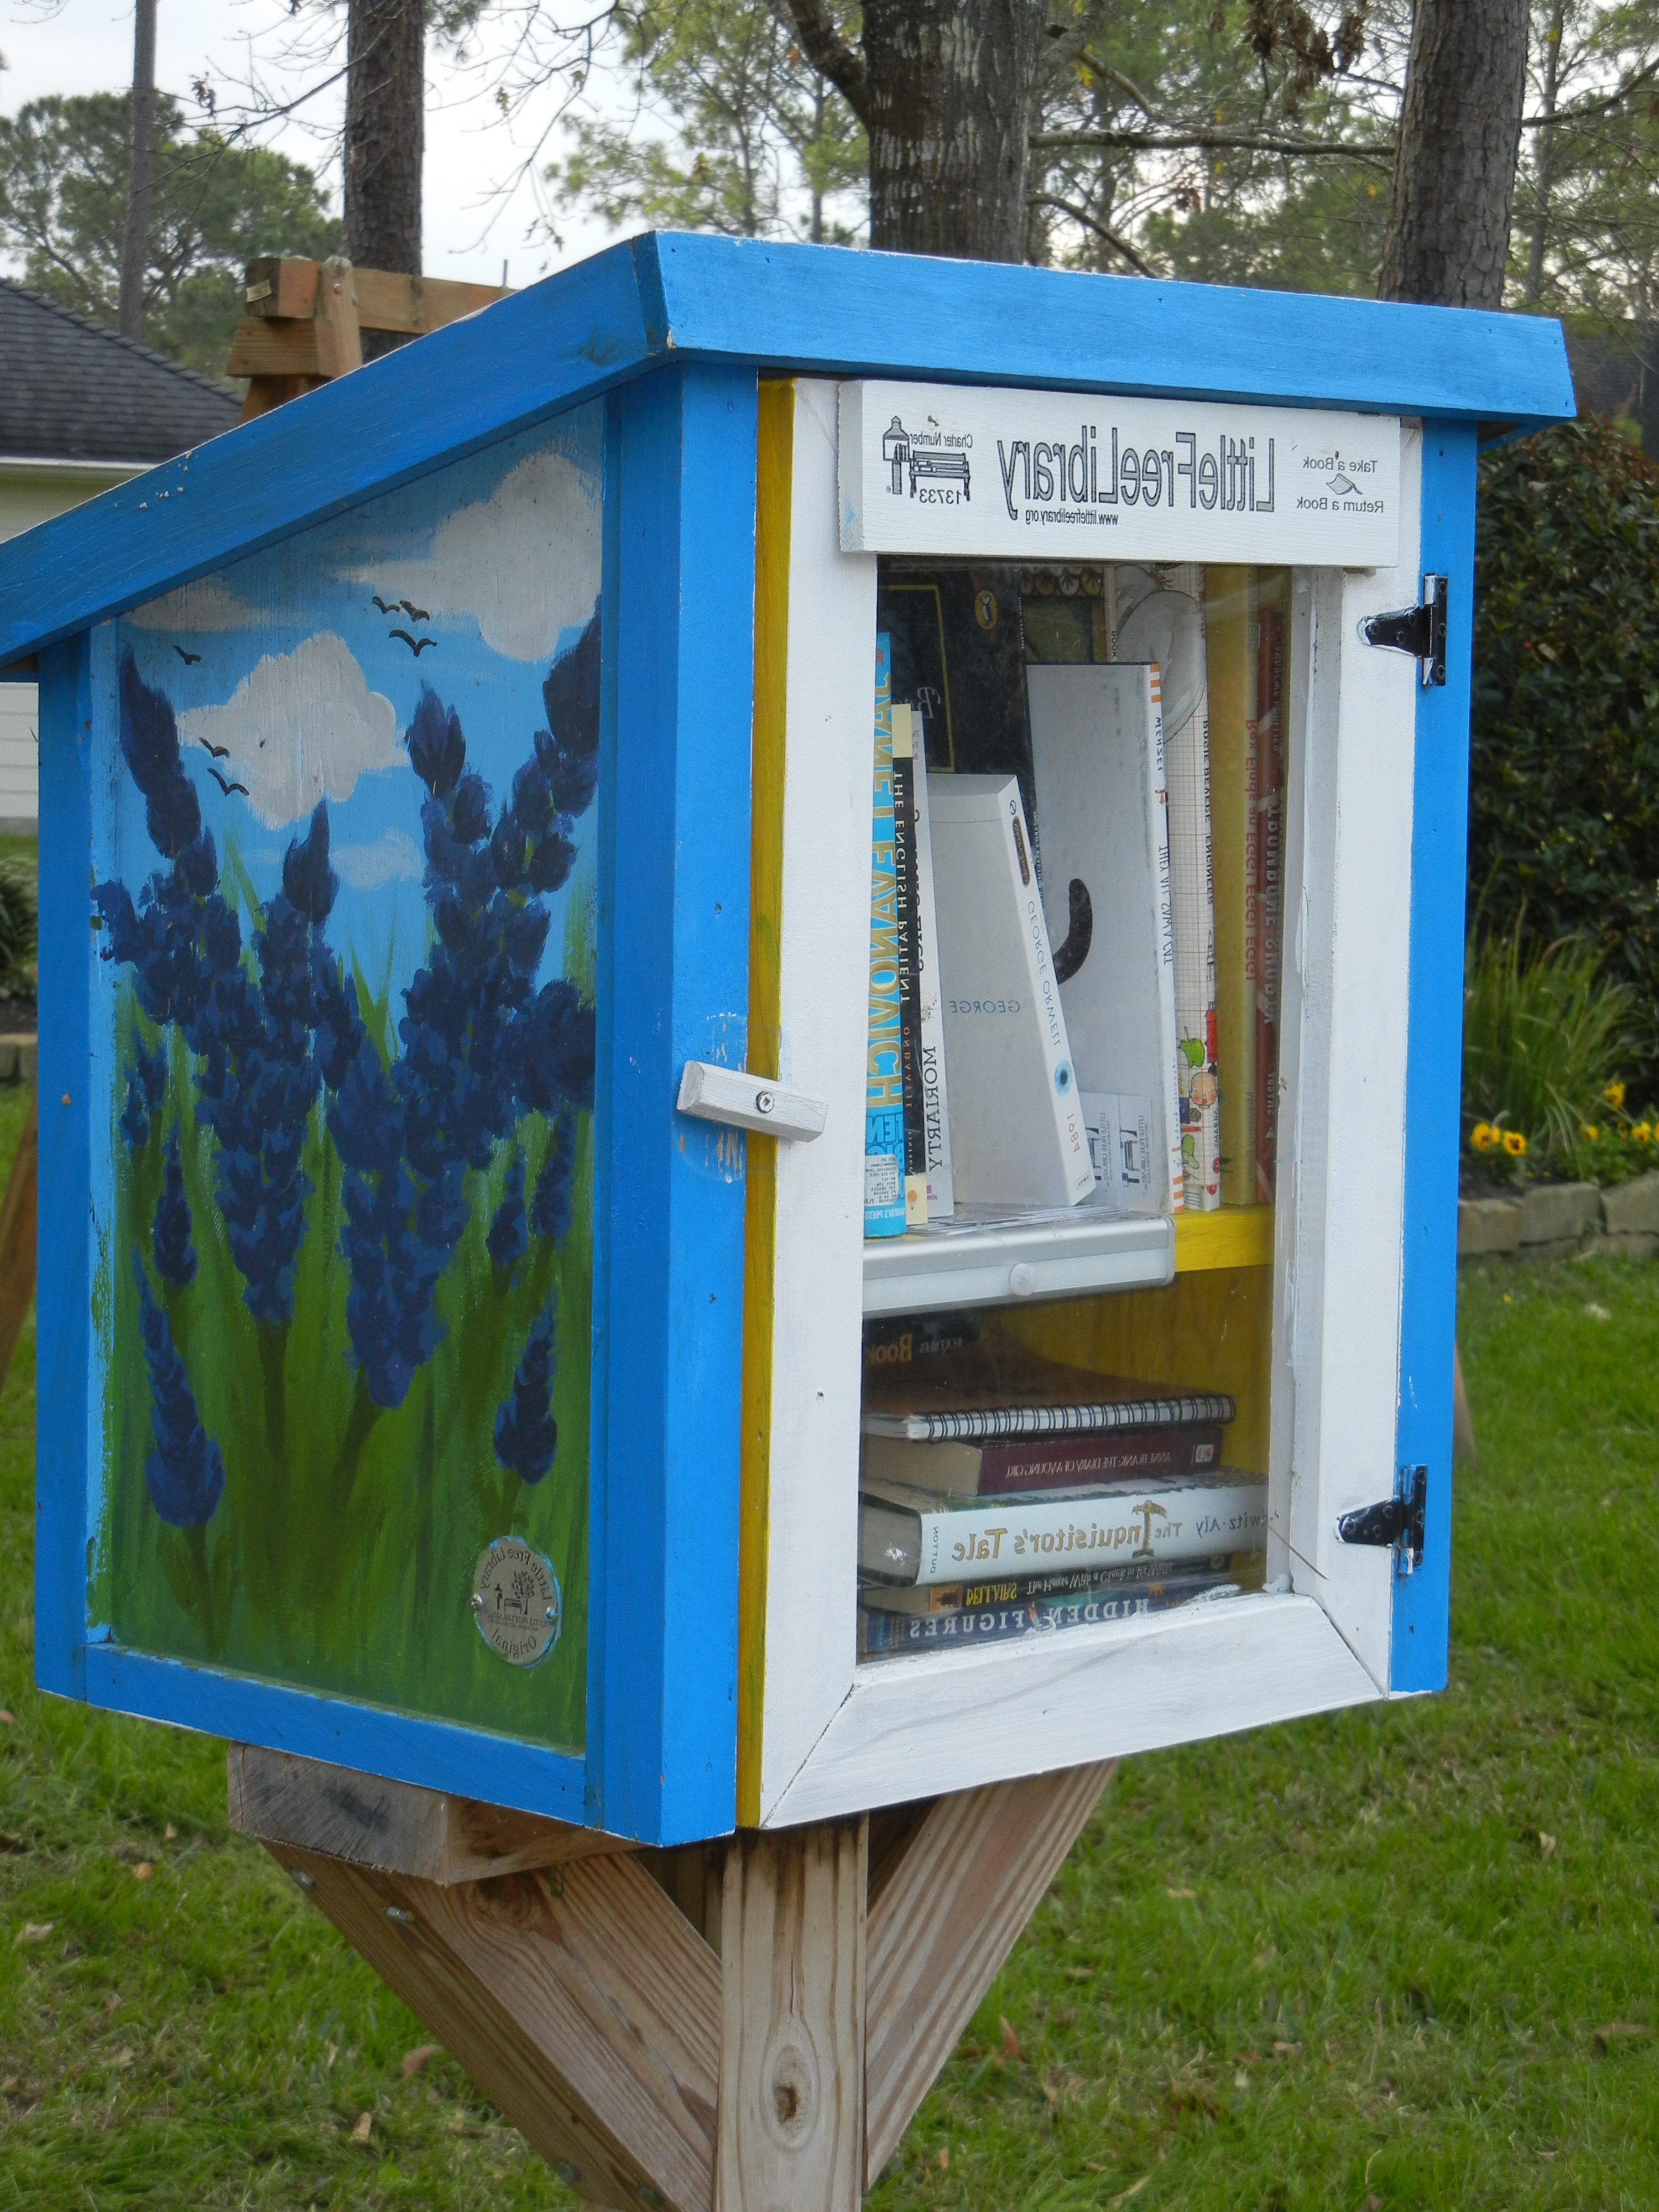 PHOTO: The Little Free Library located in Friendswood, TX is one of the micro libraries being installed in the Houston area. Photo by The Signal reporter, Robin Timme.